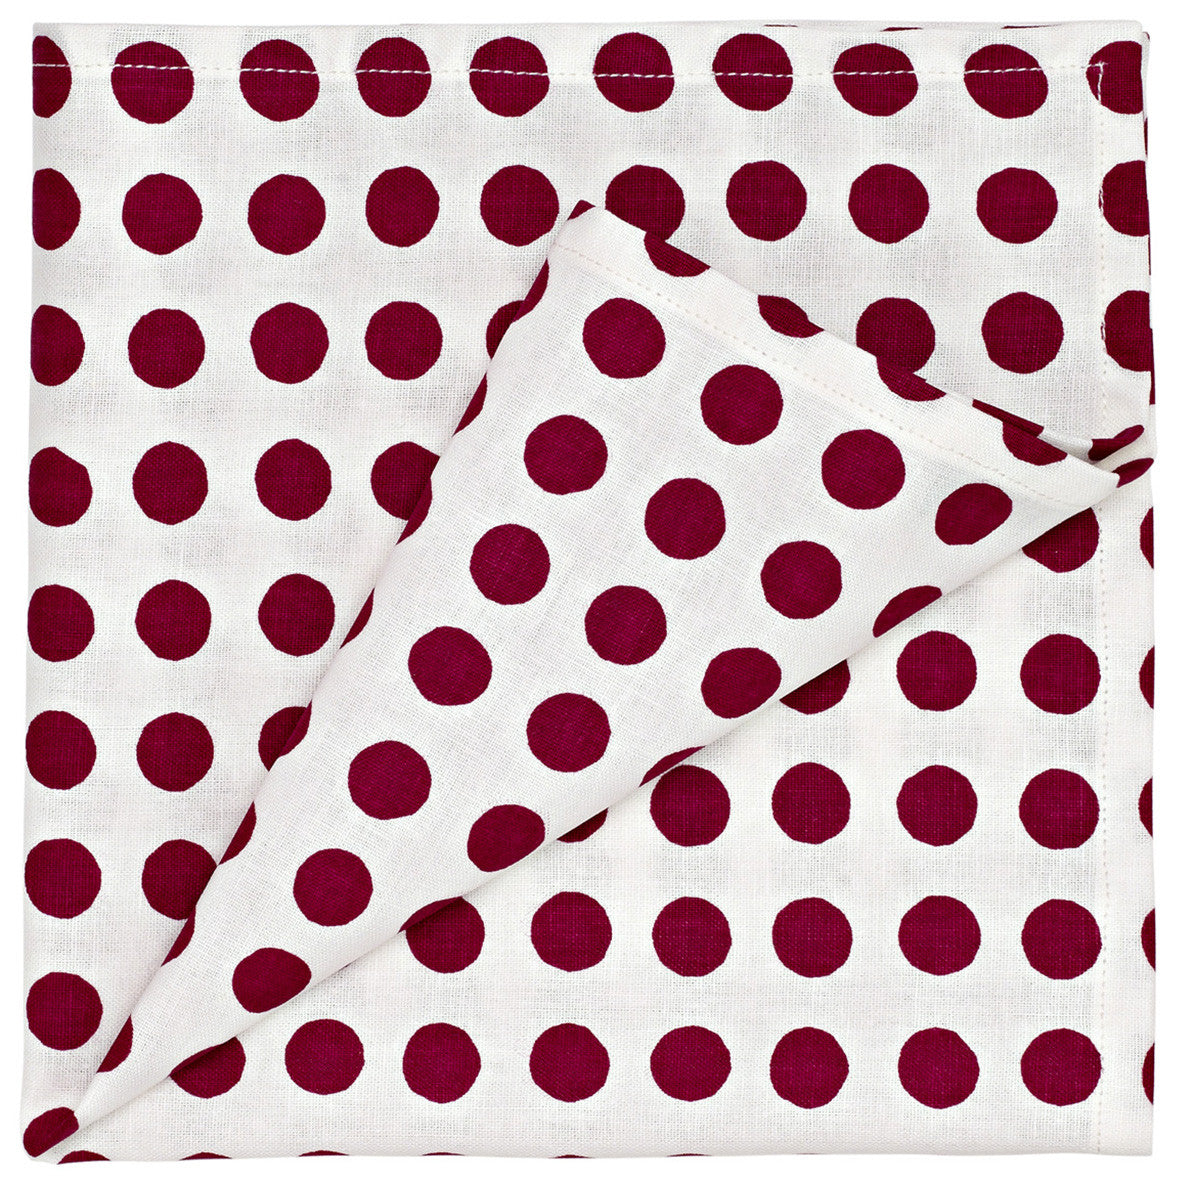 London Polka Dot Spotty Linen Napkins in Dark Vermilion Red Ships from Canada (USA)